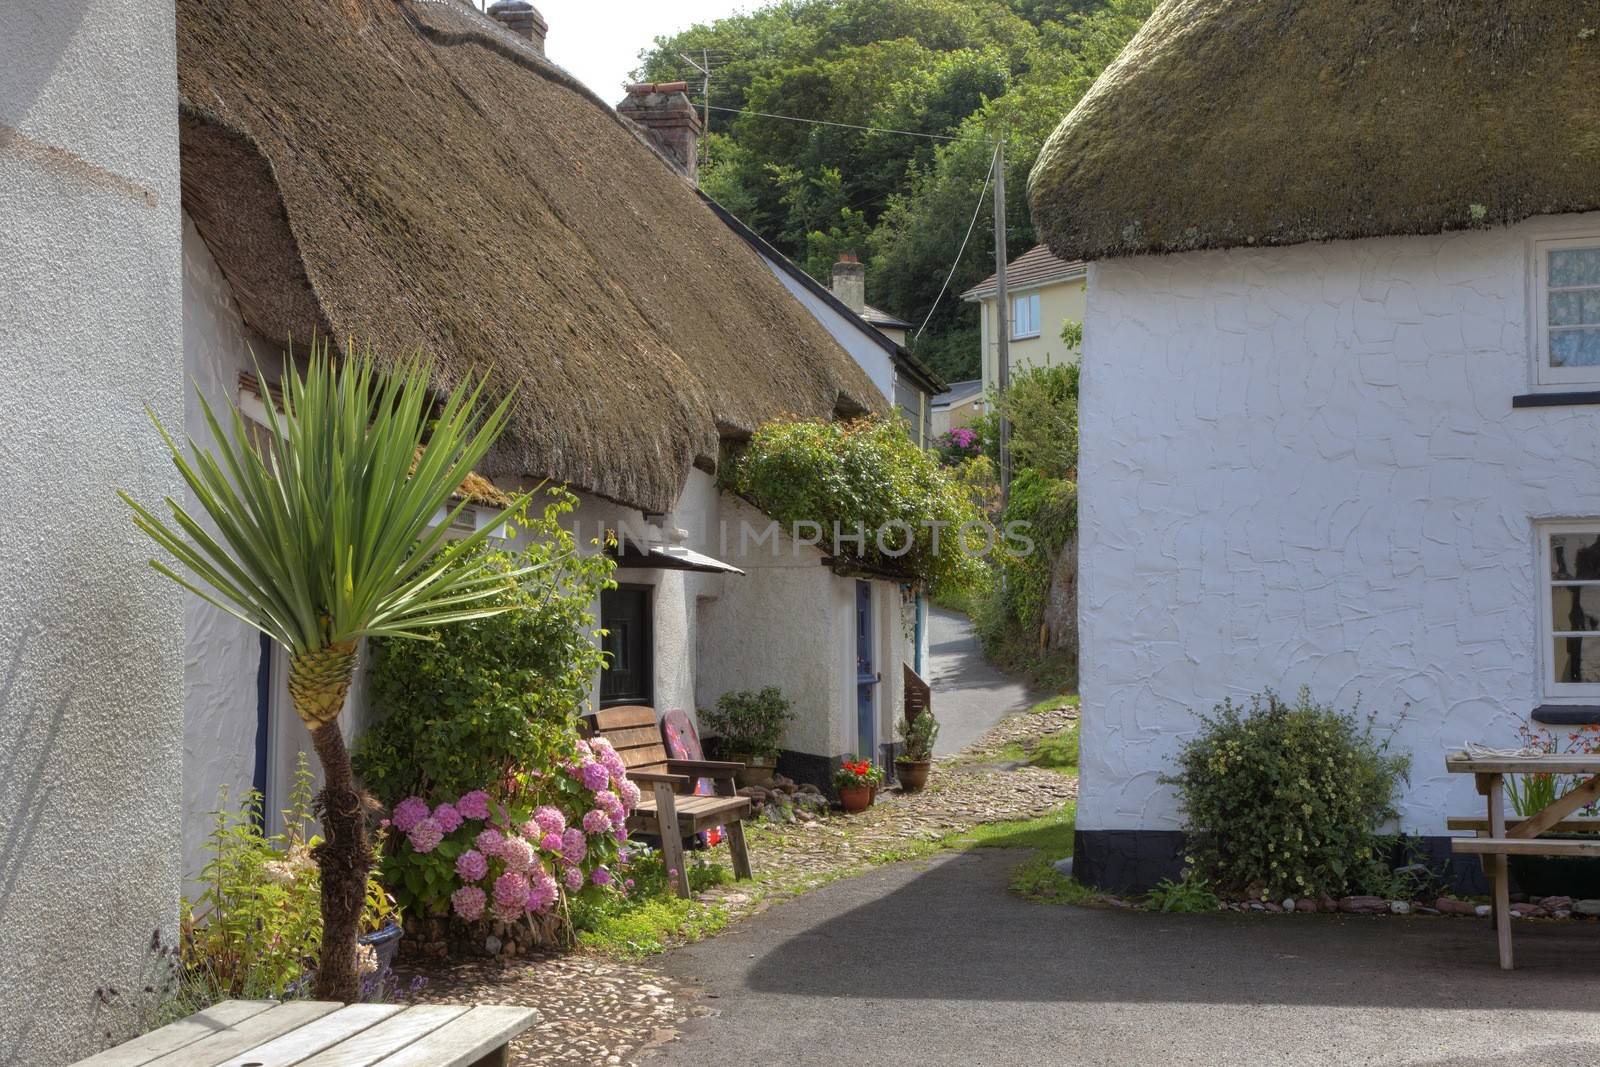 Thatched cottages at Hope Cove, Devon, England.